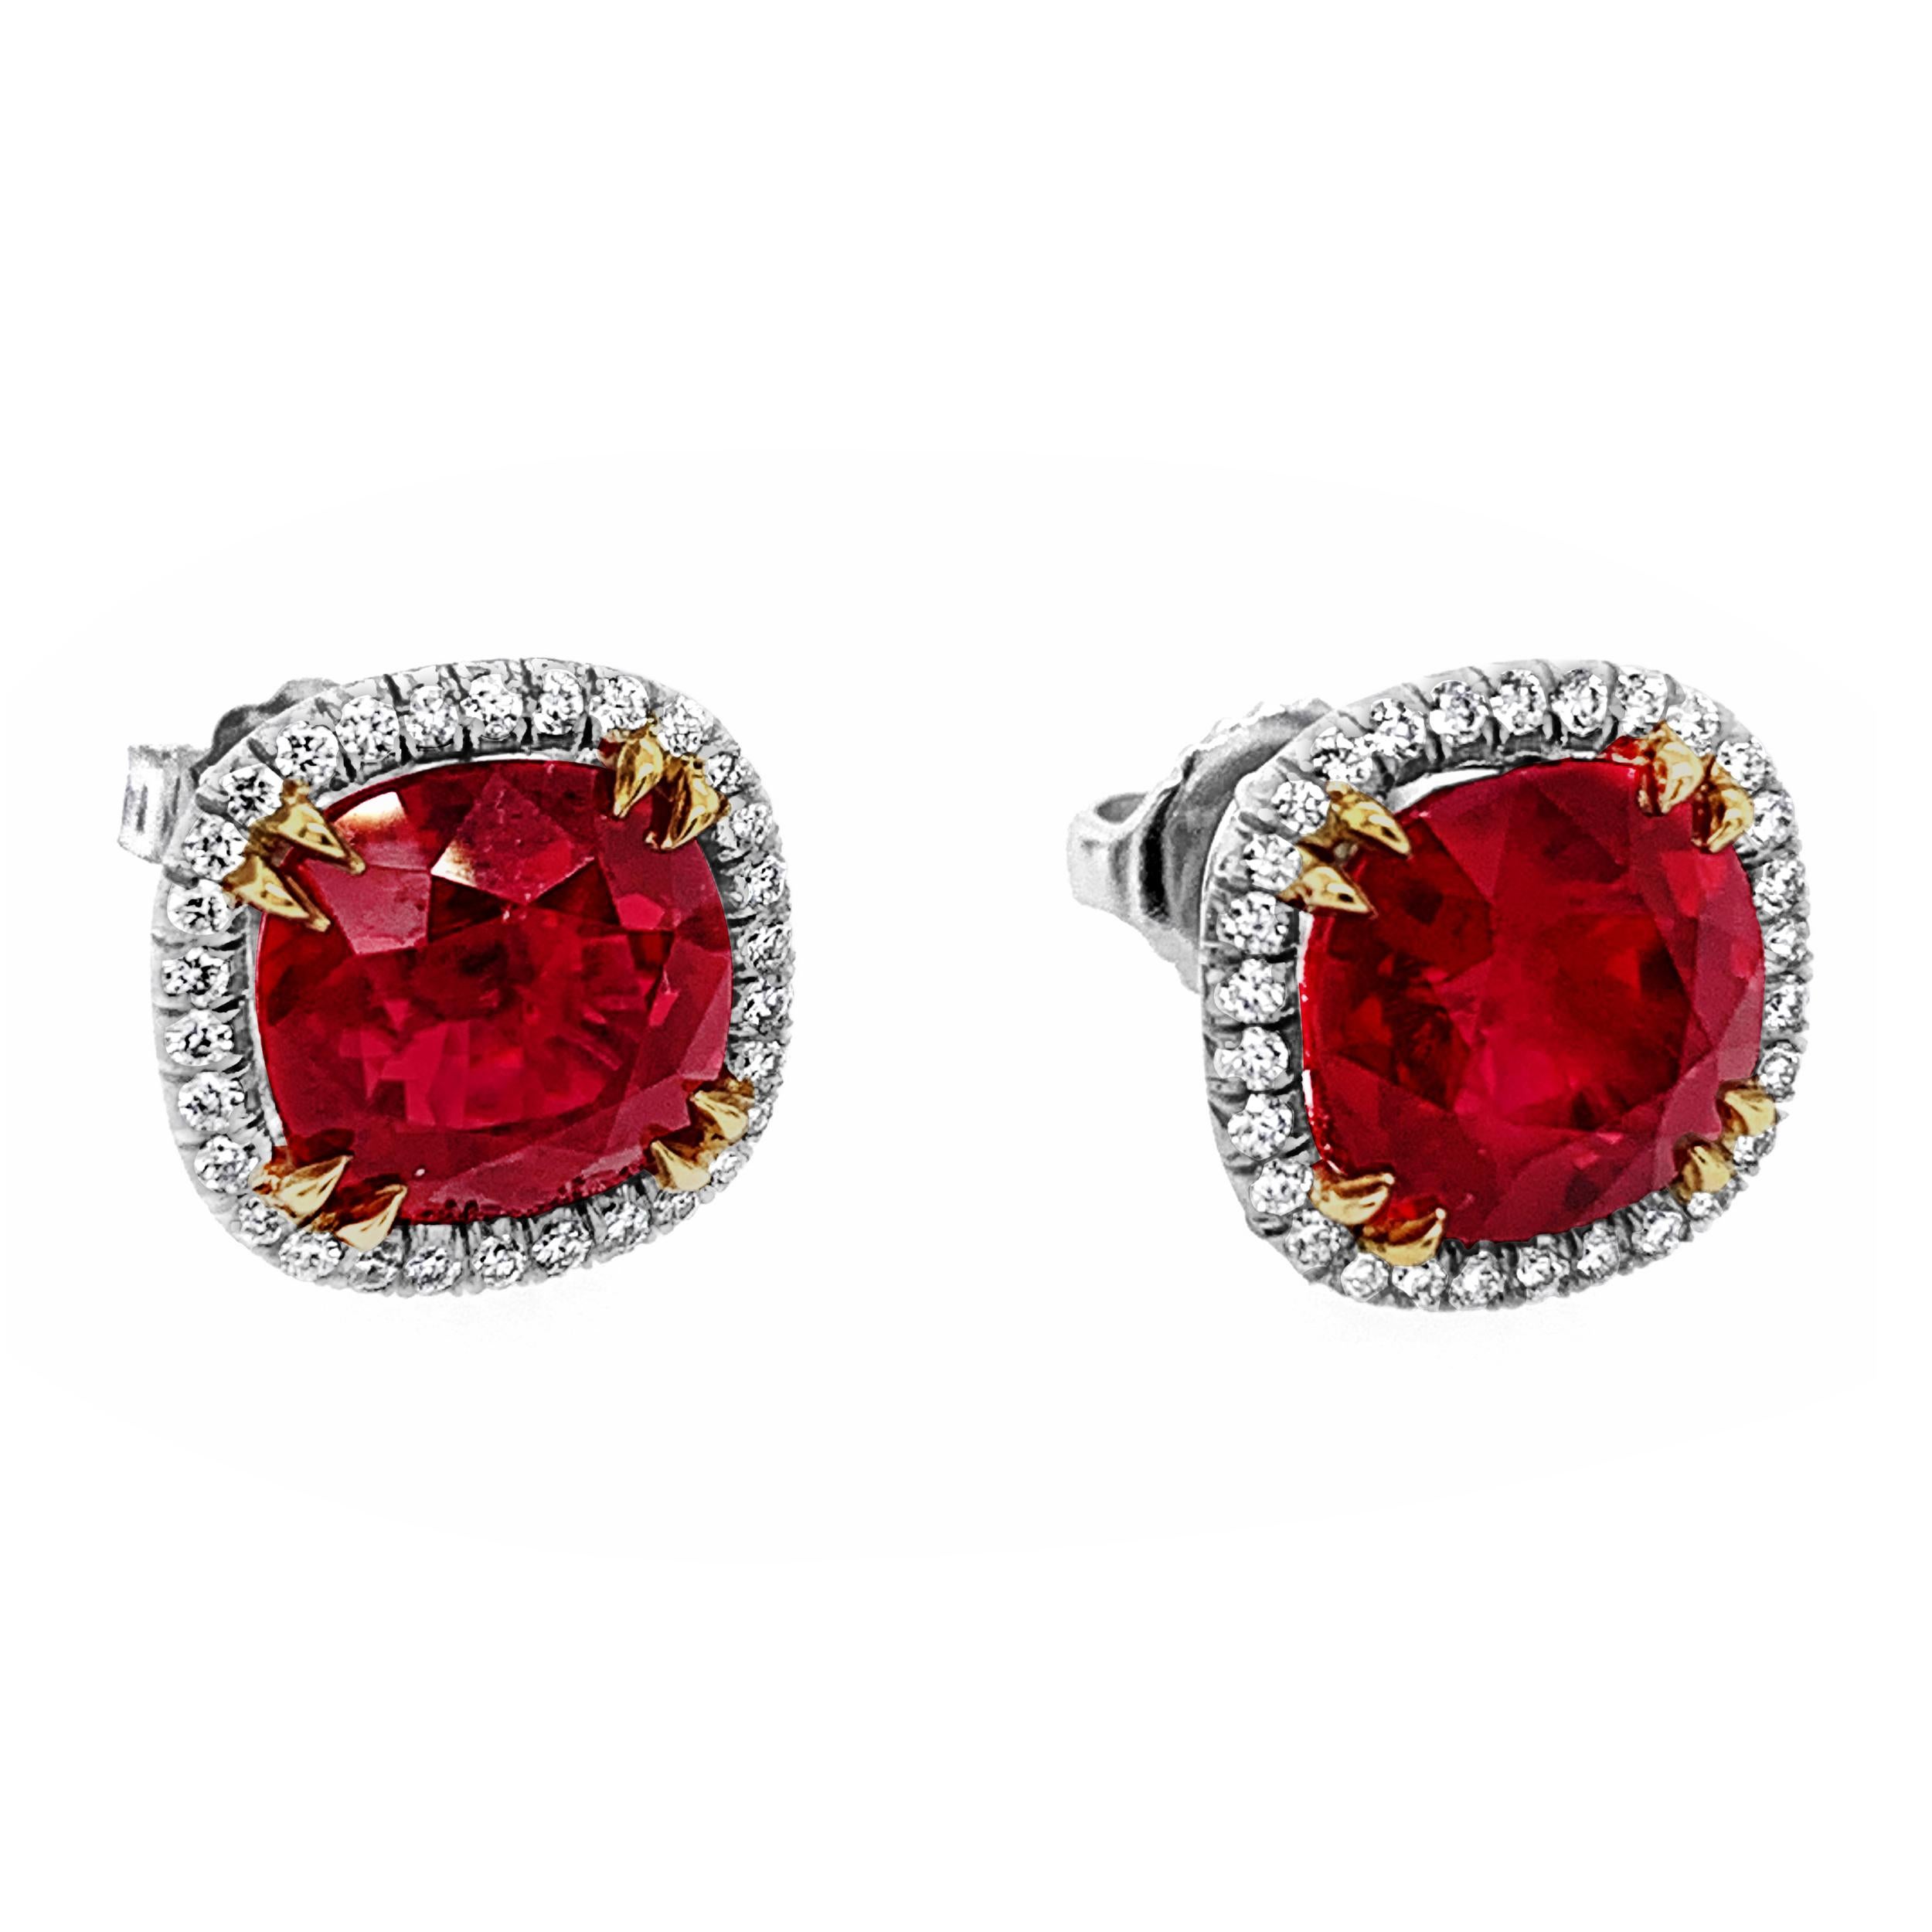 Beautiful Ruby Earrings with Diamond Halo set in Platinum with 18K Yellow Gold prongs.  Rubies are cushion cut weighing 6.09 Carats total weight.  Diamond halos surrounding rubies weigh 0.30 Carat total weight.  Friction-back posts.


